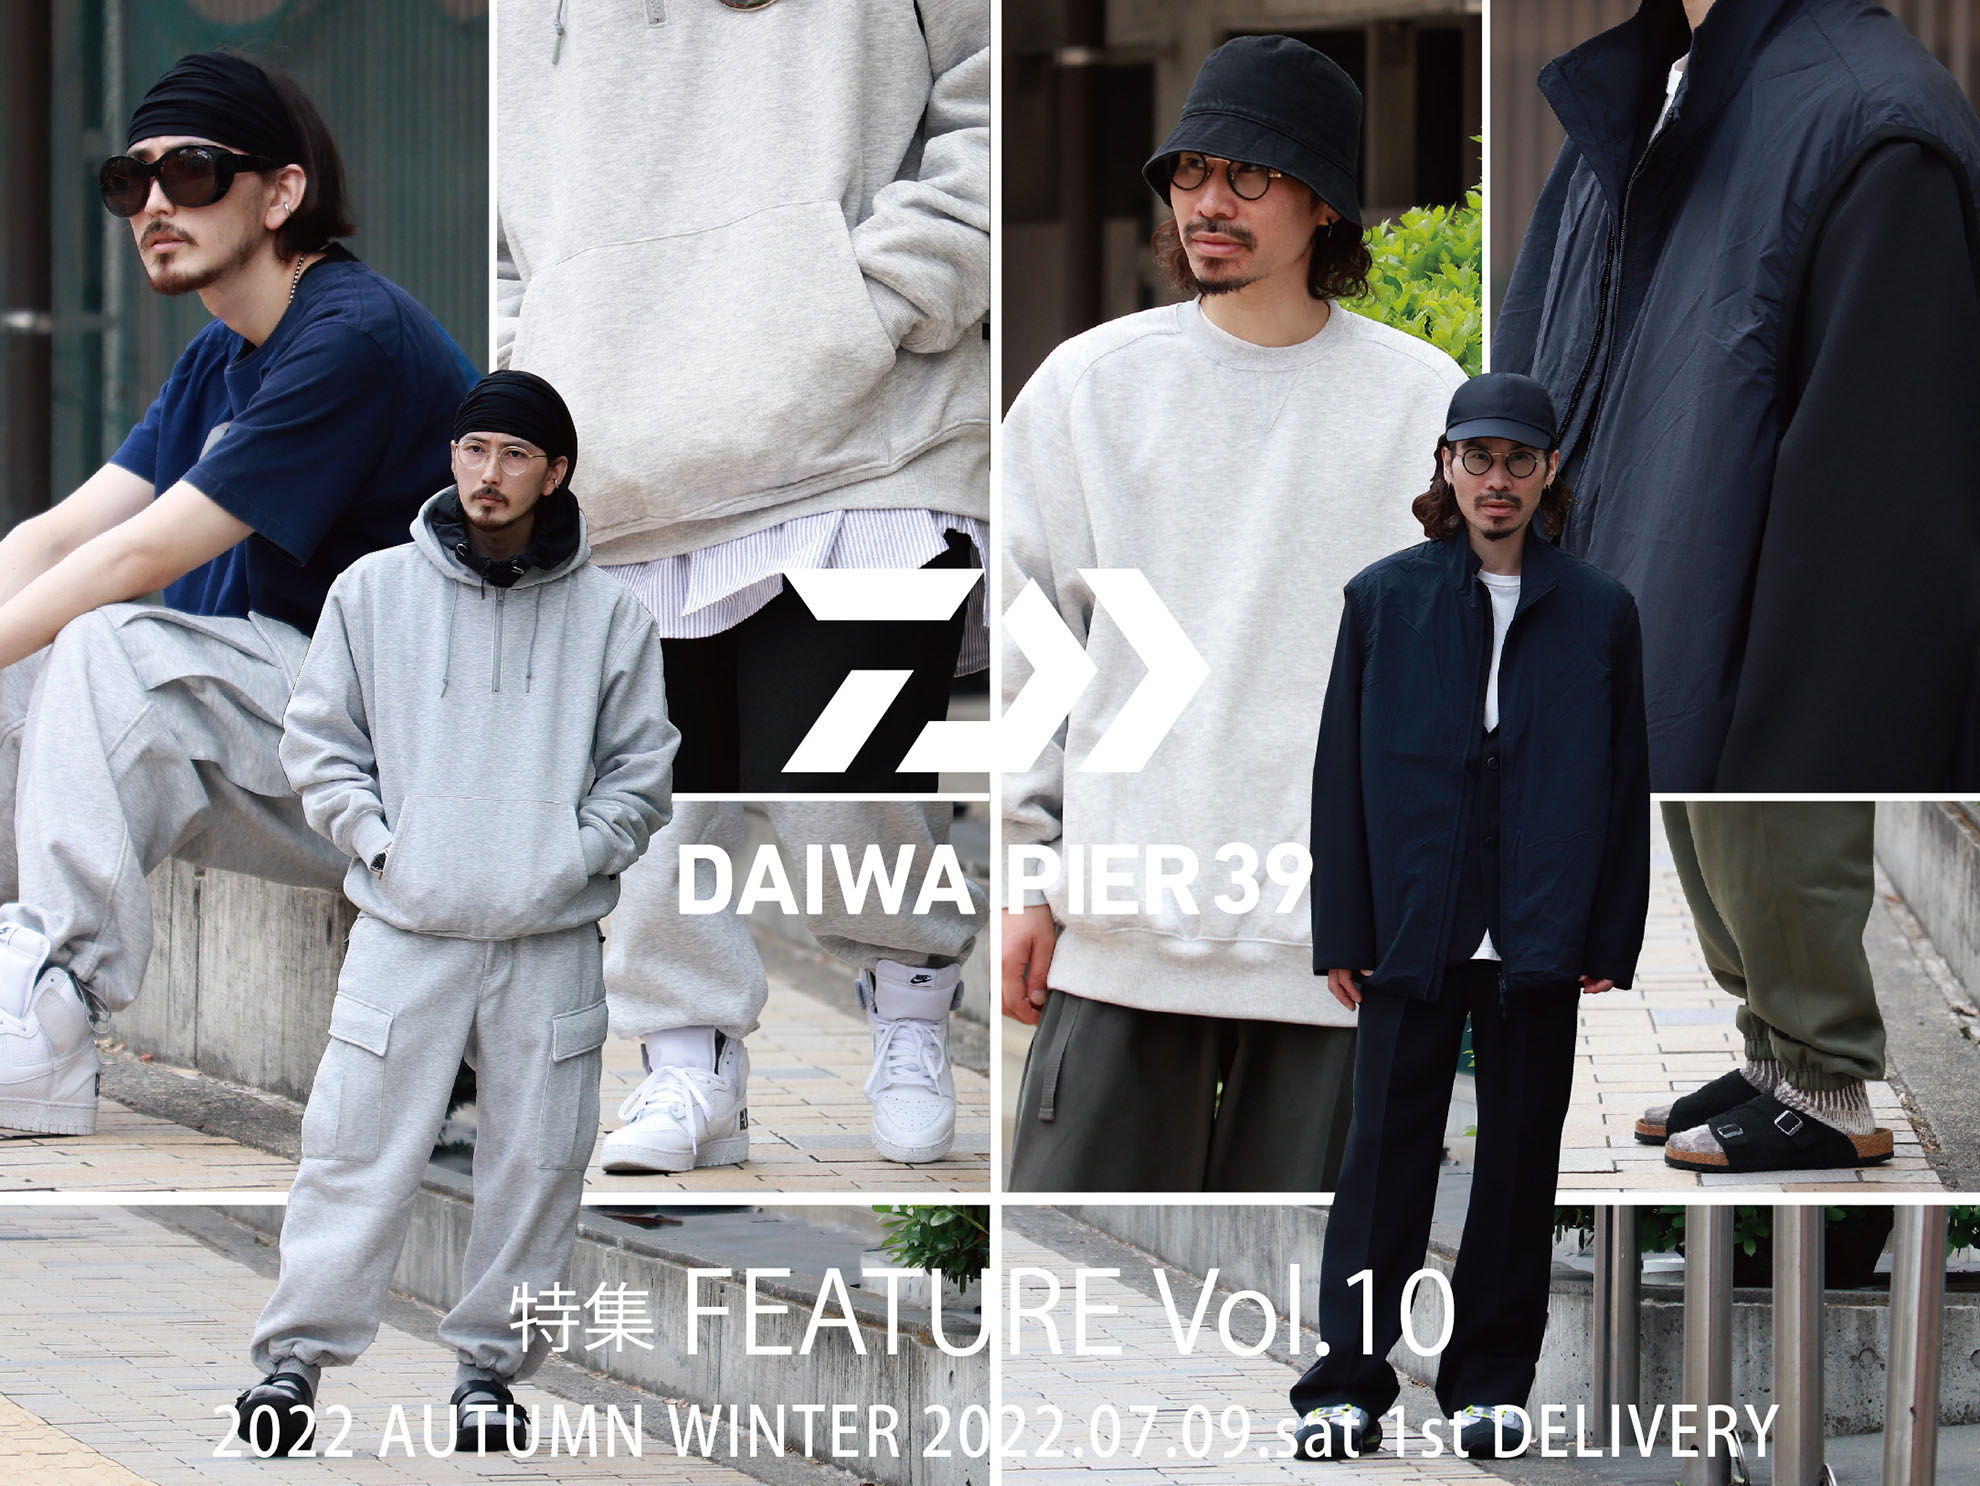 2022 DAIWA PIER39 Autumn Winter Collection 1st Delivery